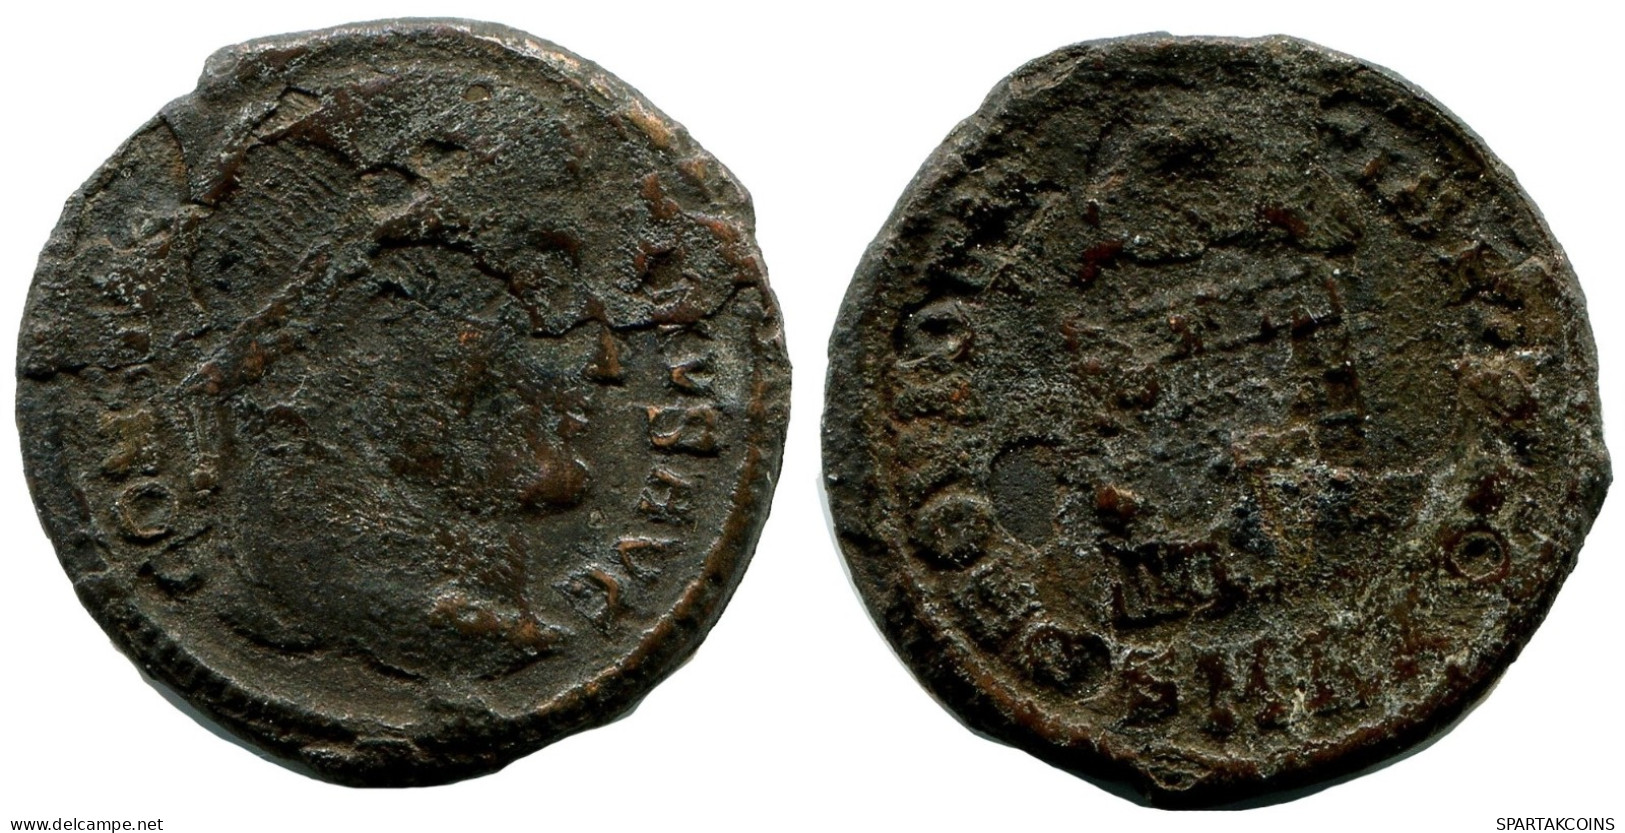 CONSTANTINE I MINTED IN CYZICUS FOUND IN IHNASYAH HOARD EGYPT #ANC11029.14.D.A - El Impero Christiano (307 / 363)